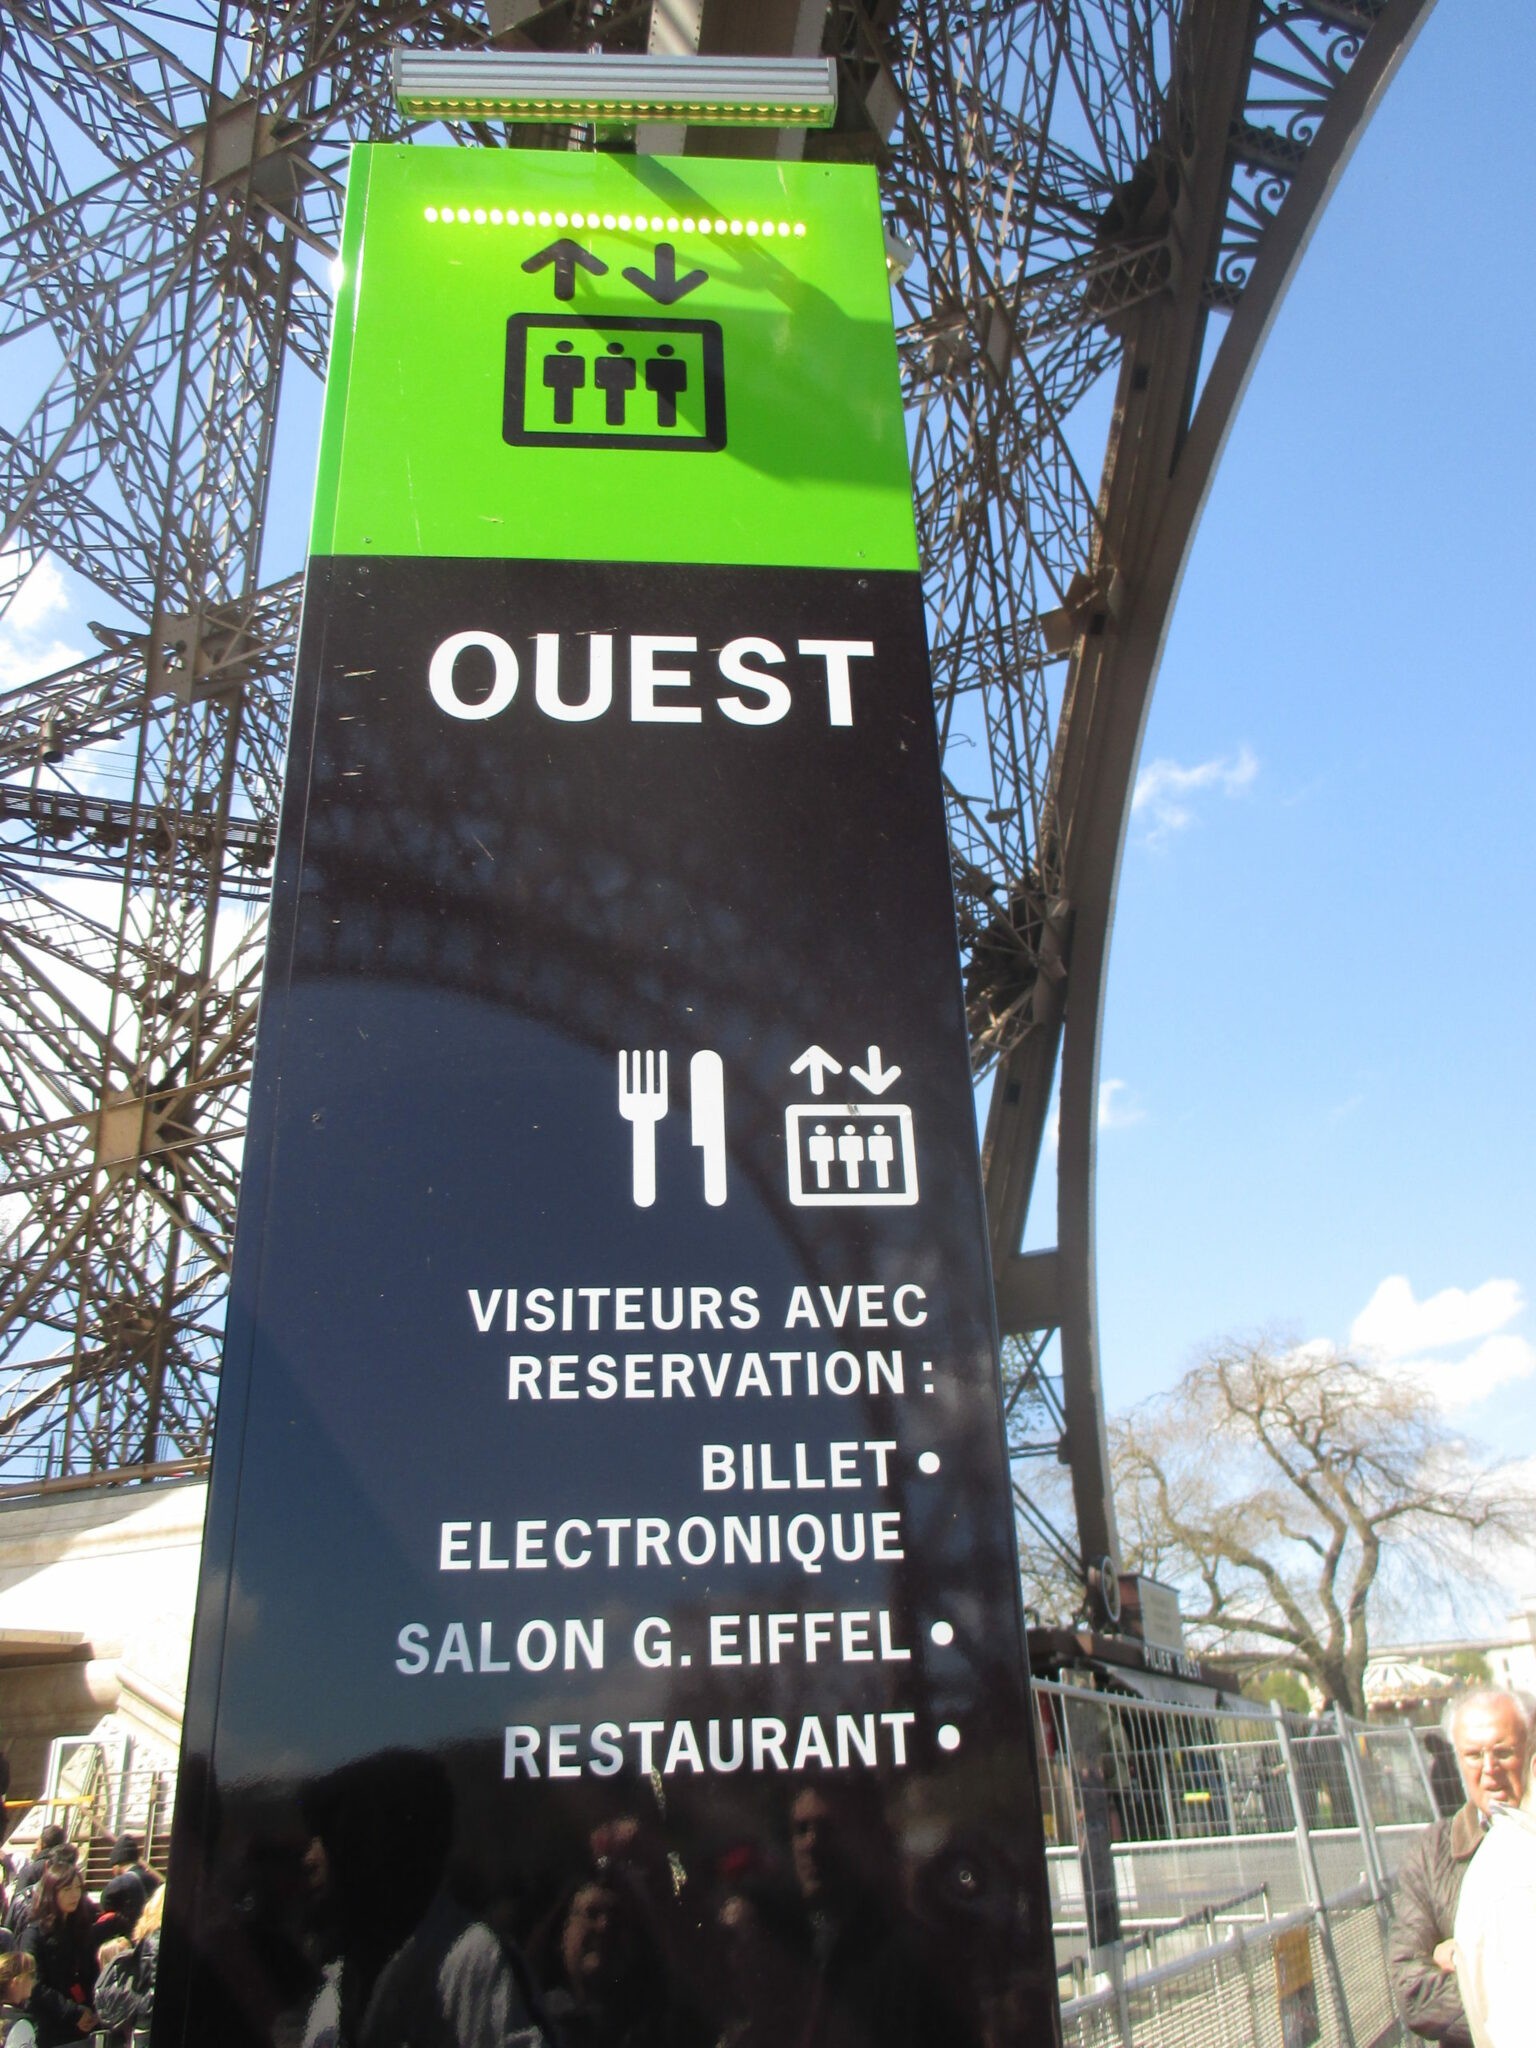 The sign for visitors with reservation and e-tickets -- skip the line here!